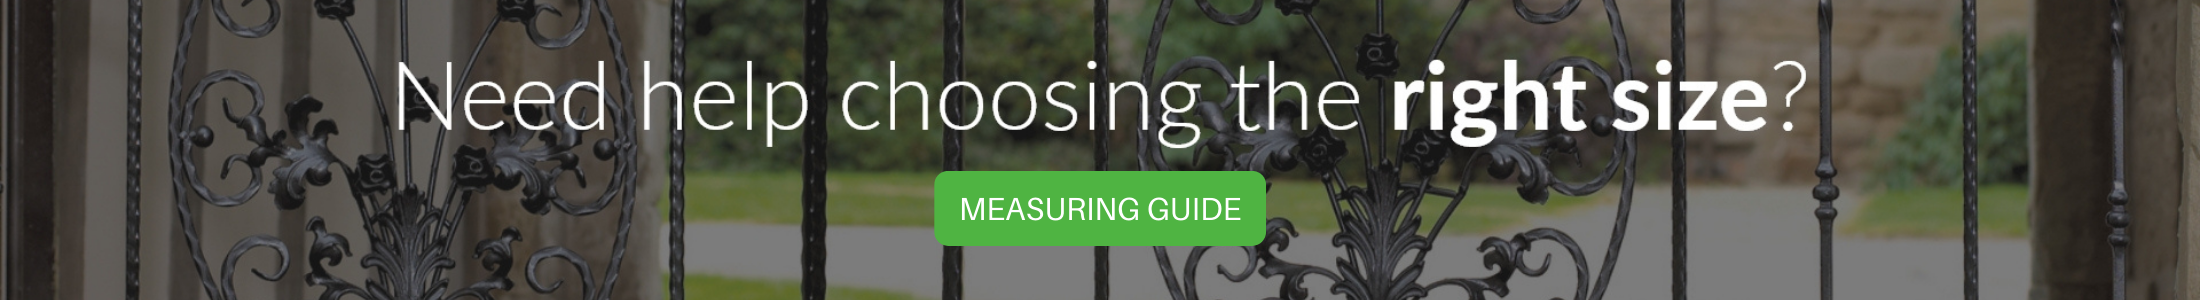 Refer to the measuring guide for help with ordering sizes